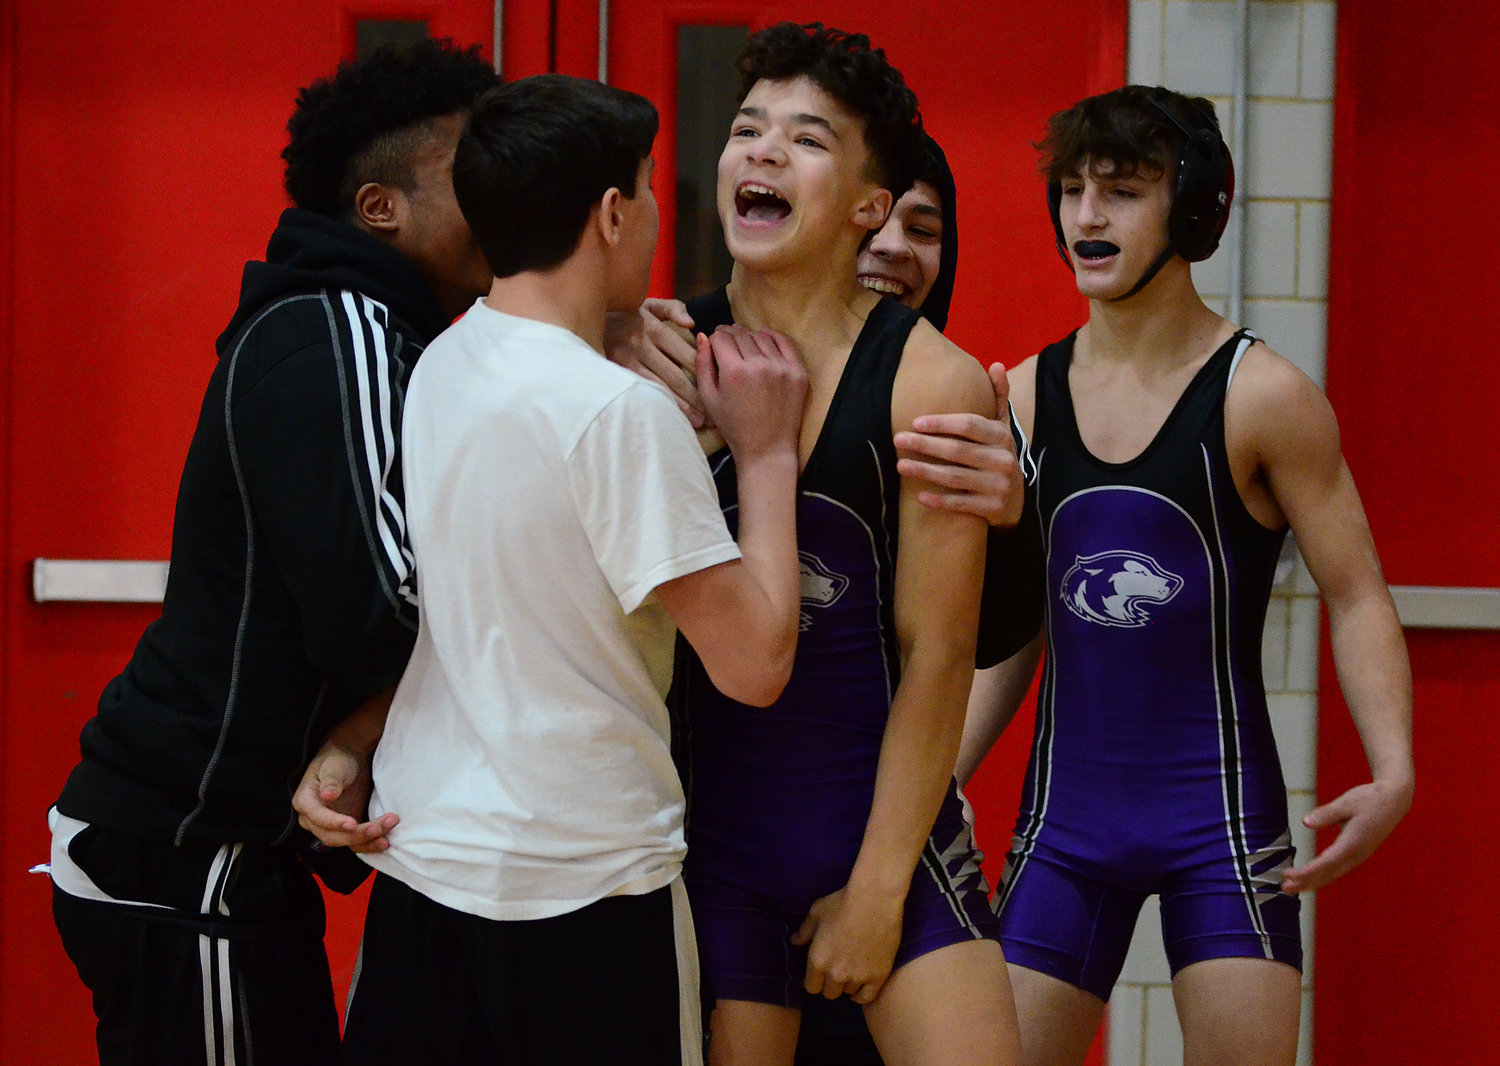 Teammates surround 120 pound Ethan Bland after he pinned Cumberland’s Zach Schonhoff during a quad meet at East Providence High School on Monday.